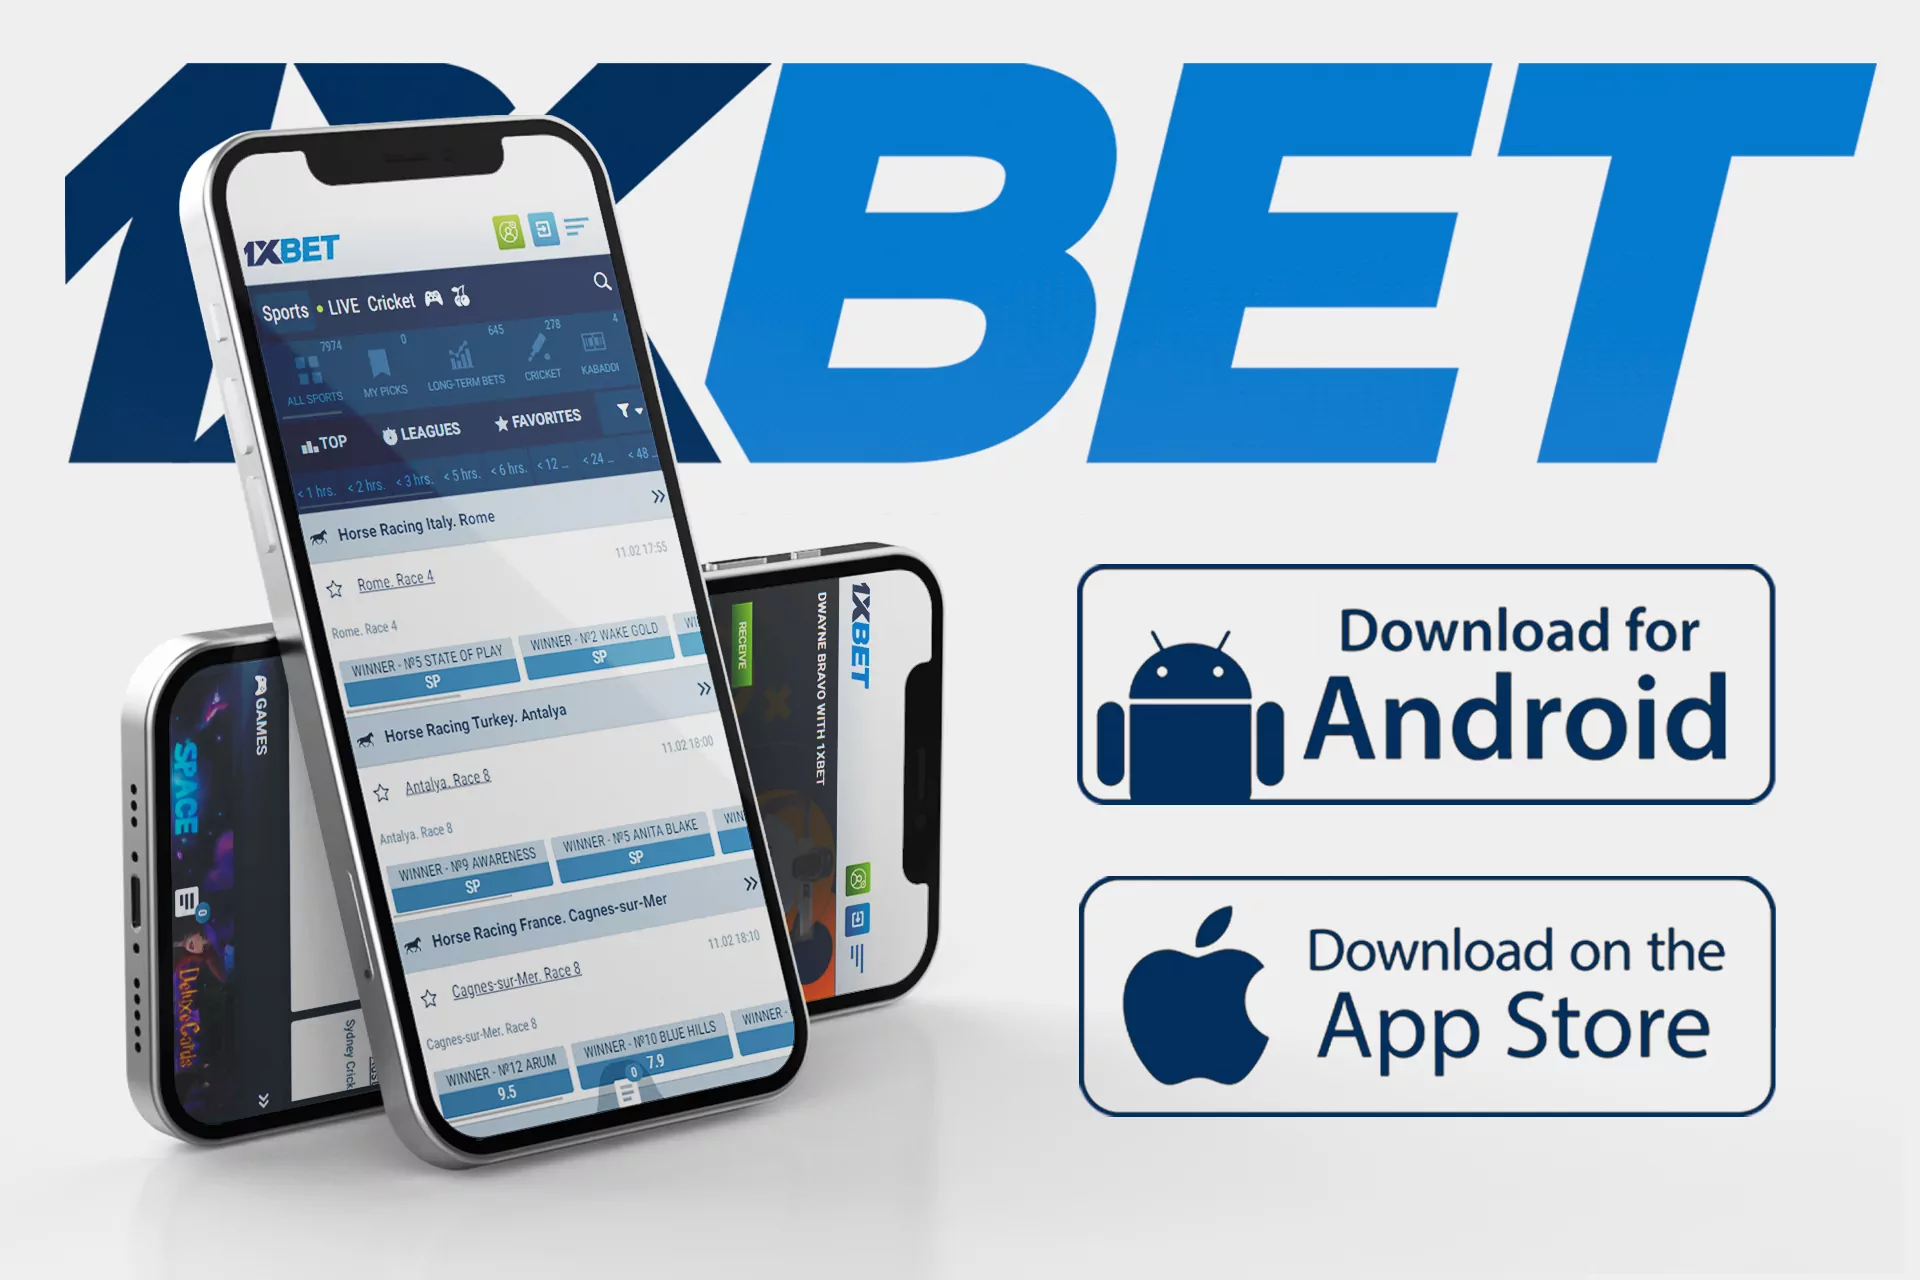 In the 1xBet app, you can place bets on all the most popular horse racing events.